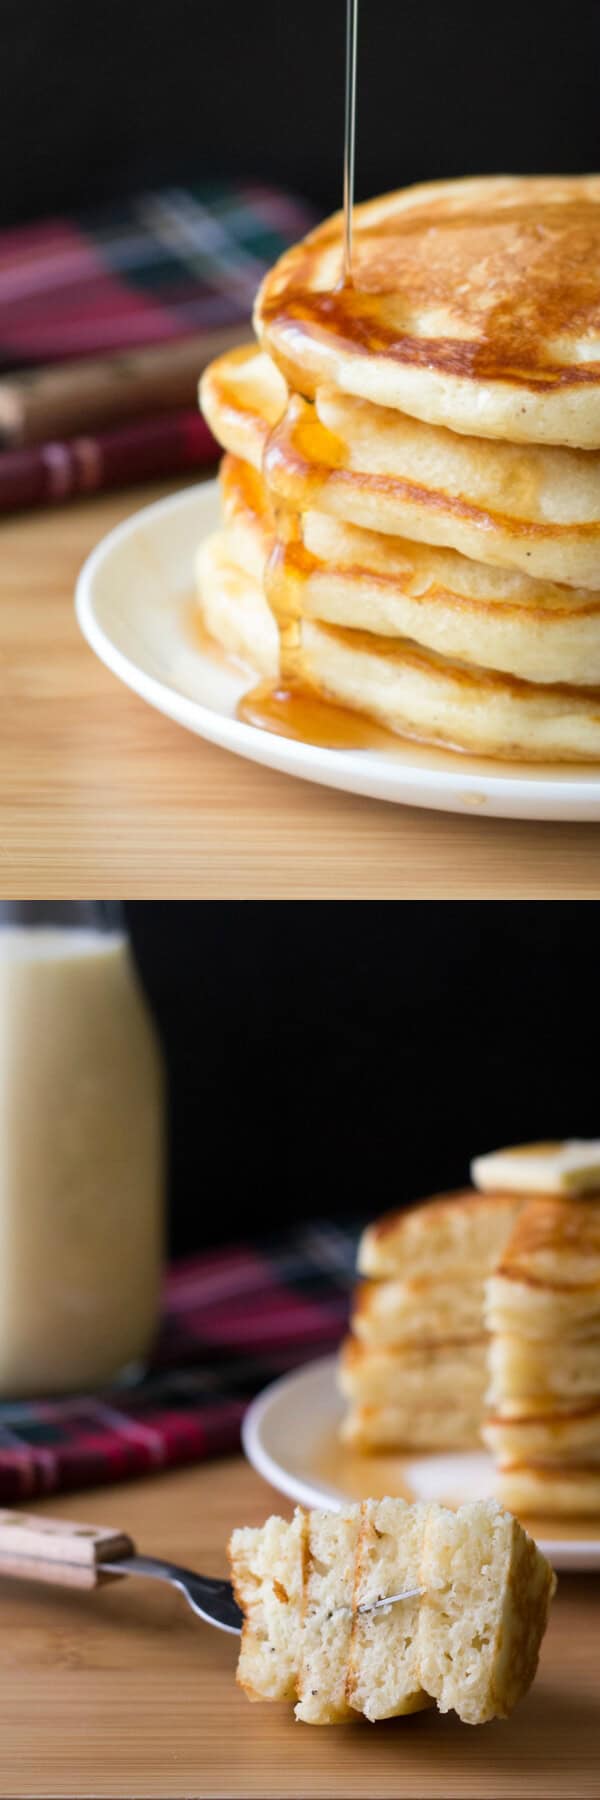 These thick, fluffy Eggnog Pancakes are perfect for holiday breakfasts. Don't wait til Christmas for these delicious pancakes! www.justsotasty.com